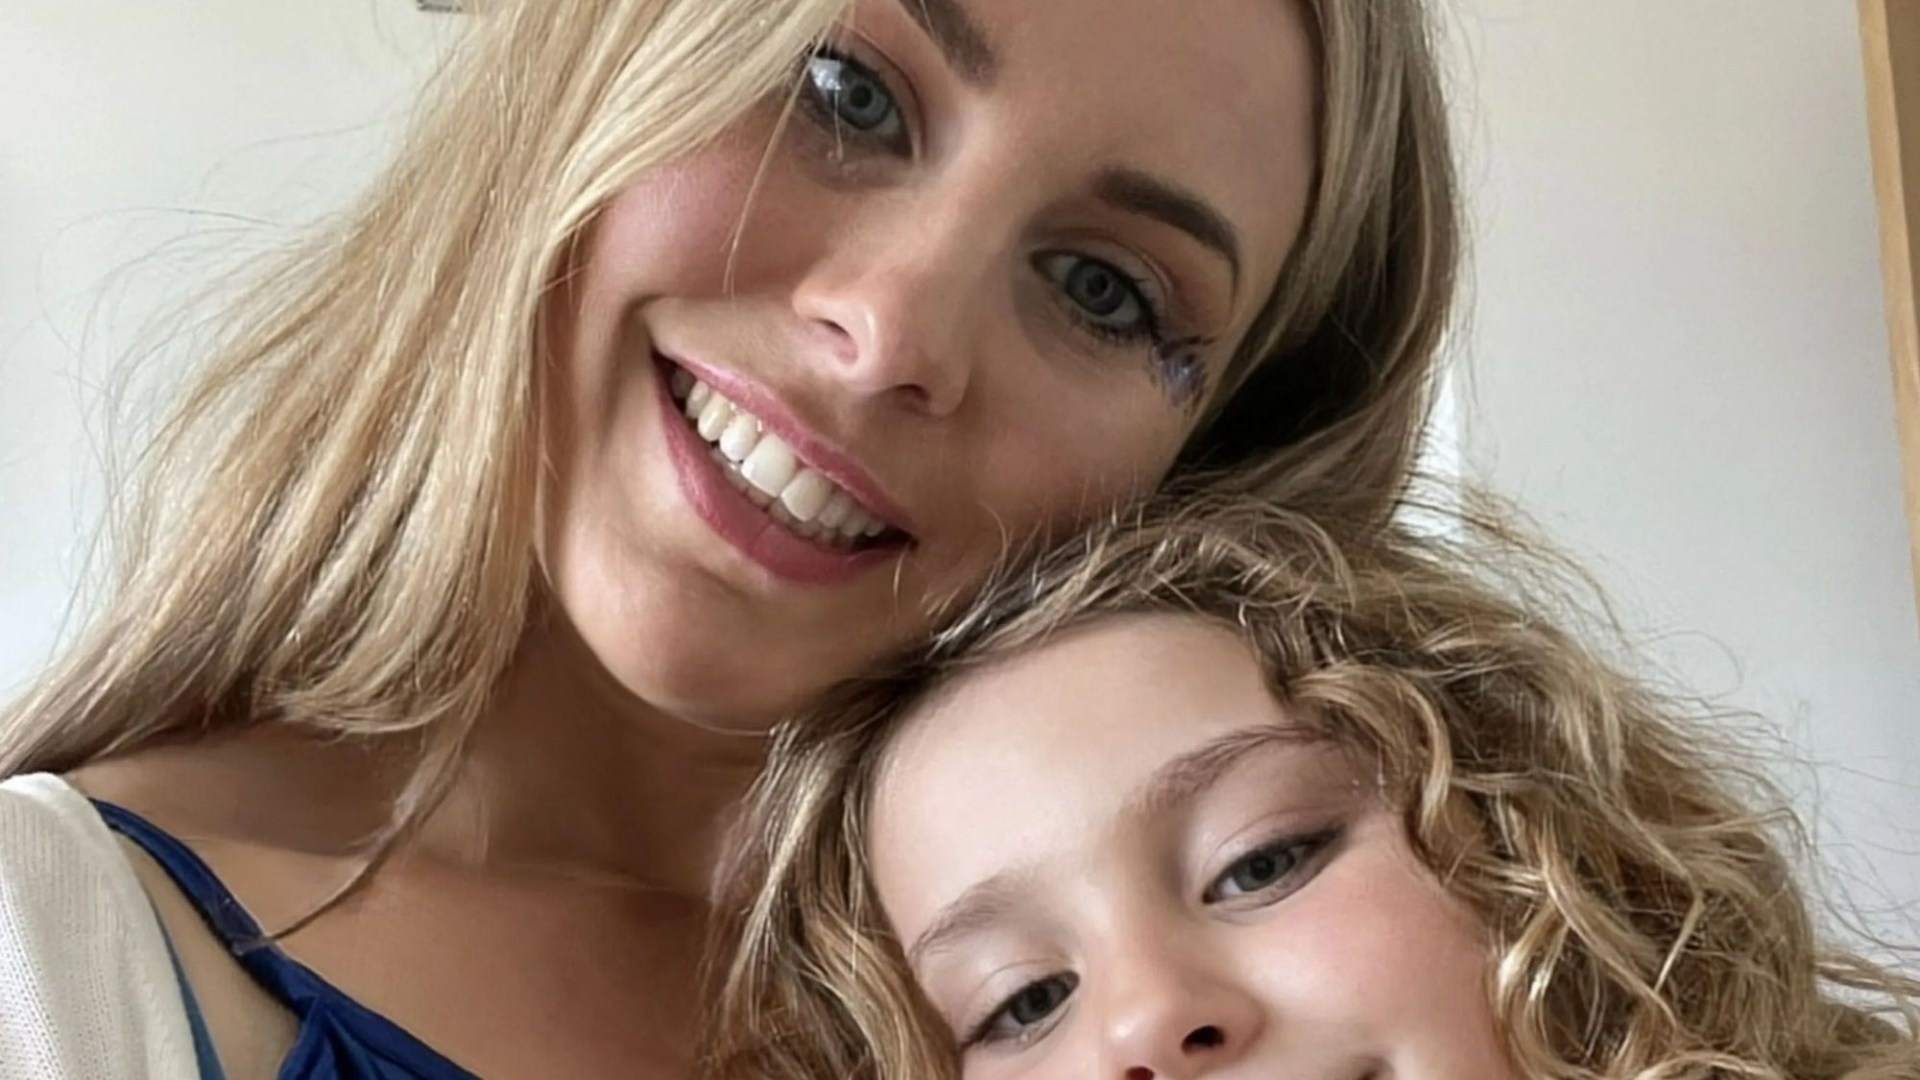 Mum who fears she won’t see her daughter grow up warns ‘don’t use body puffs in the shower’ after cancer diagnosis [Video]